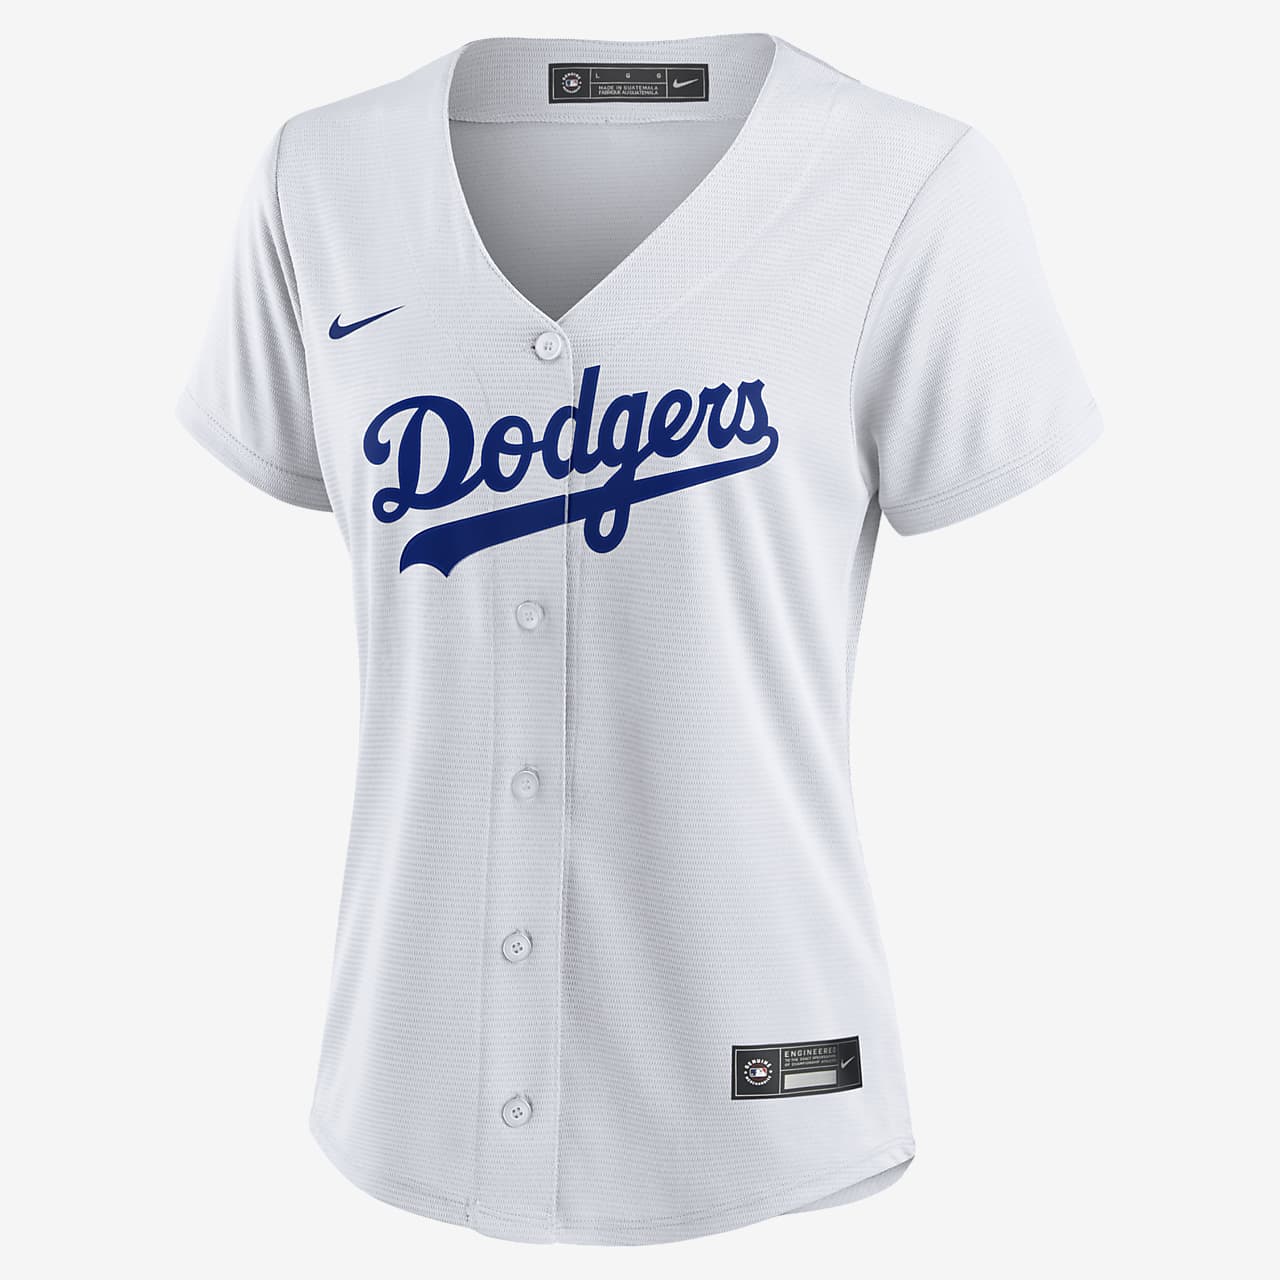 Dodgers No22 Clayton Kershaw Men's Nike White Fluttering USA Flag Limited Edition Authentic Jersey